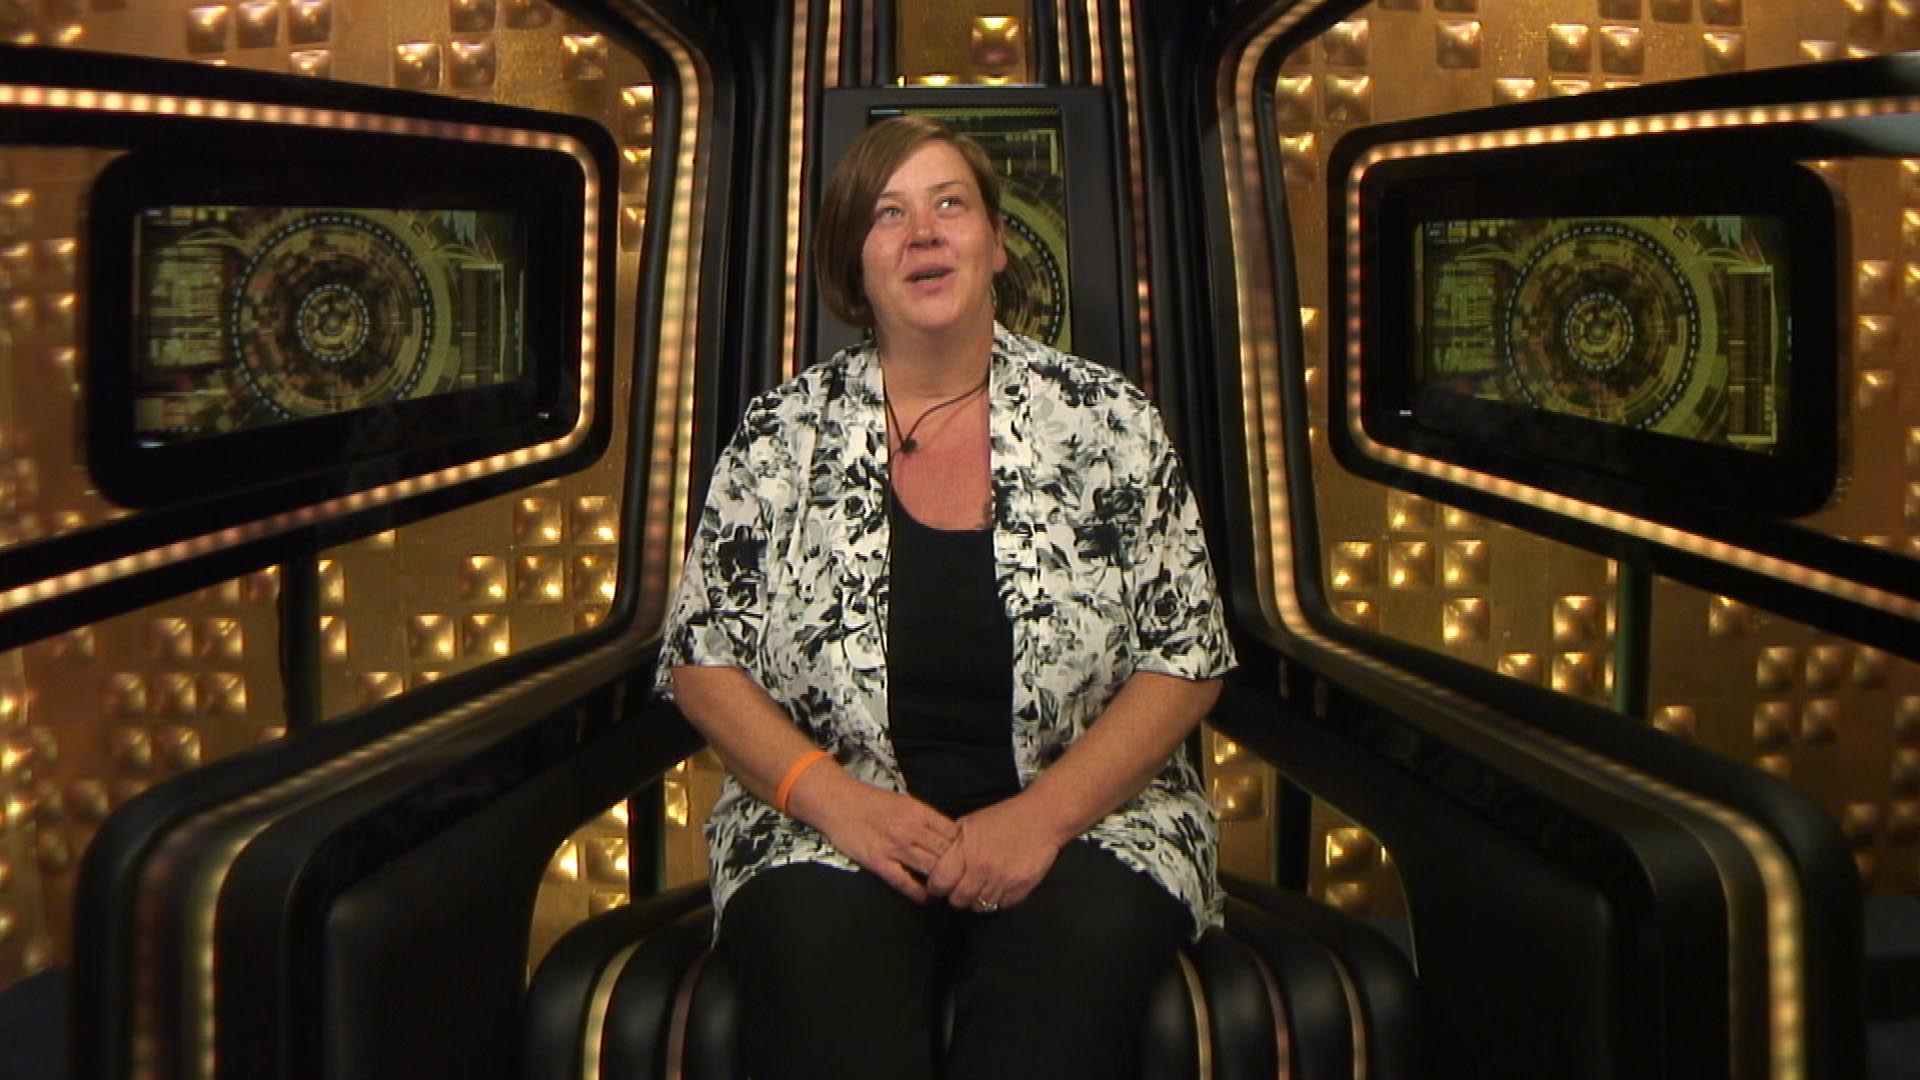 Day 26: Housemates reflect on Celebrity Big Brother experience